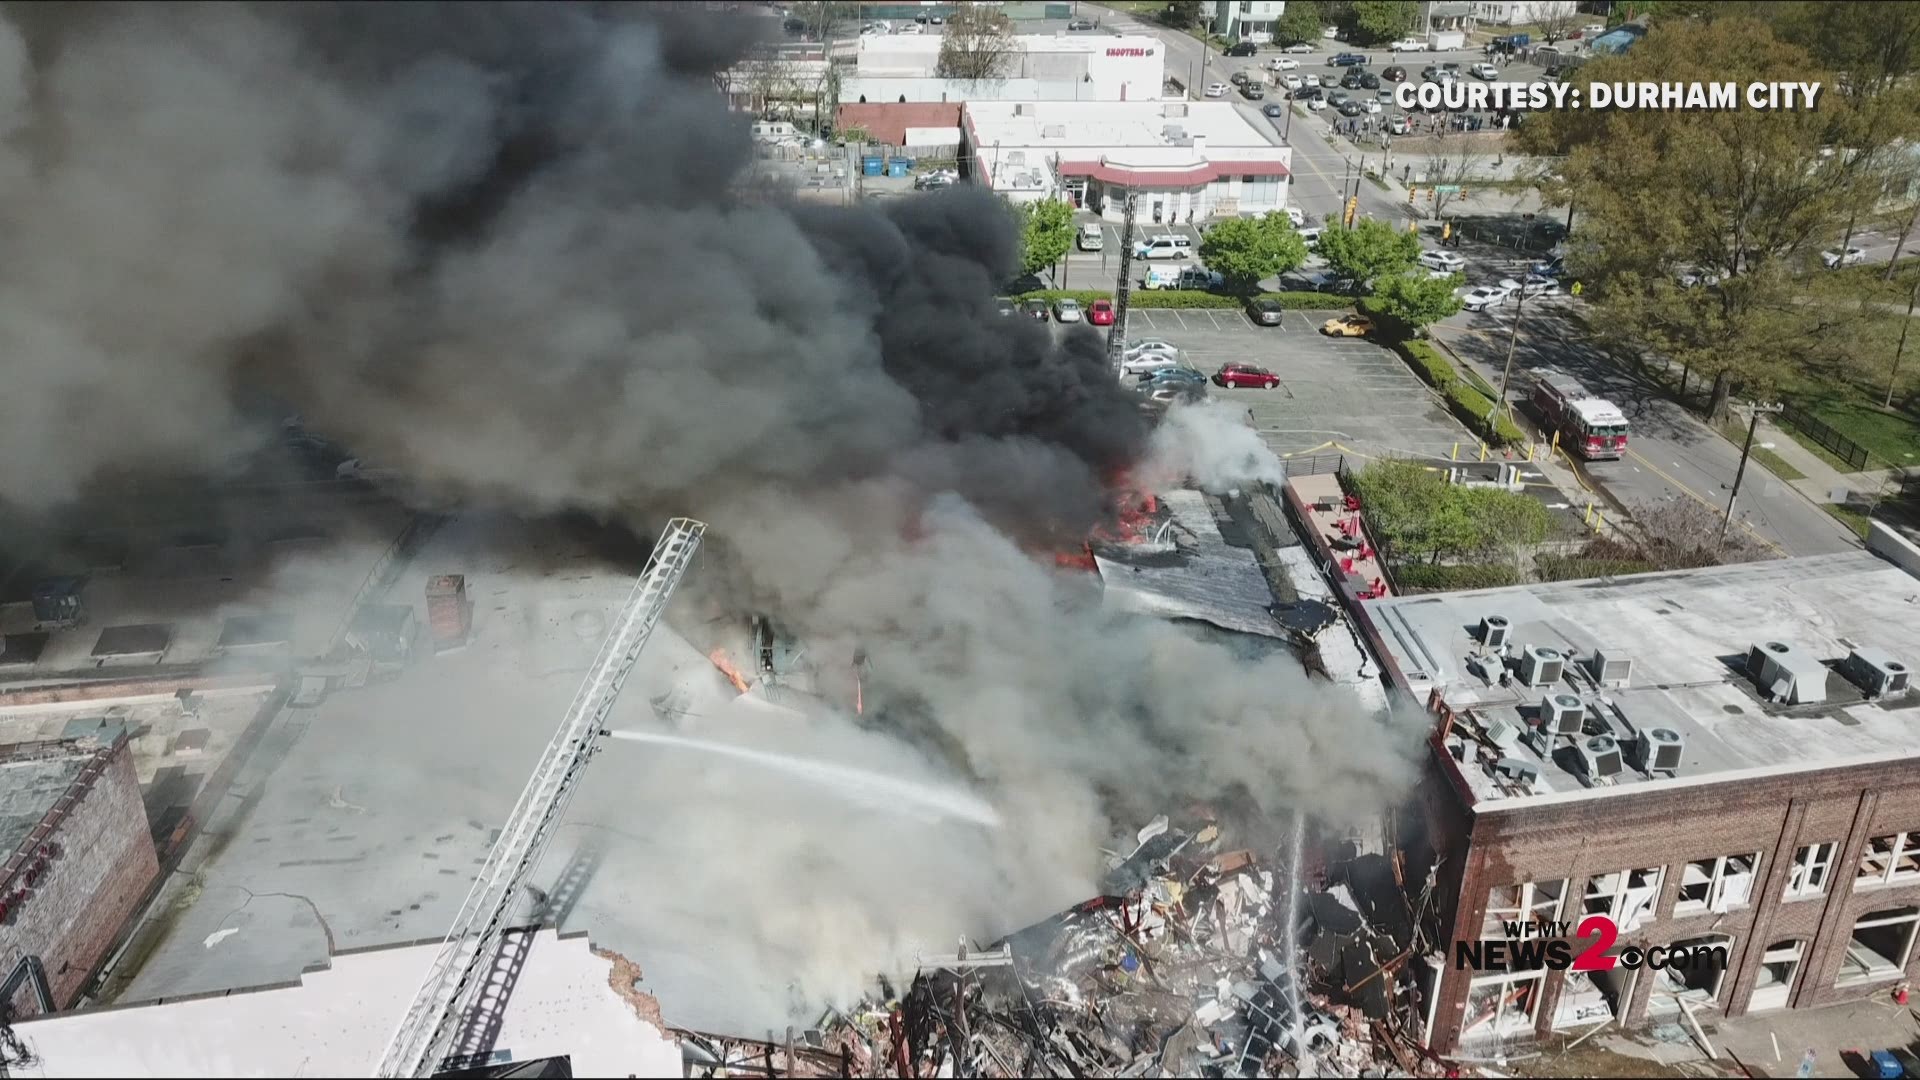 The city of Durham released video taken from a firefighter's helmet-camera. It shows the aftermath of the explosion. Coffee shop owner, Kong Lee, 61 was killed in the April 25, 2019 blast.  The explosion has been ruled accidental.